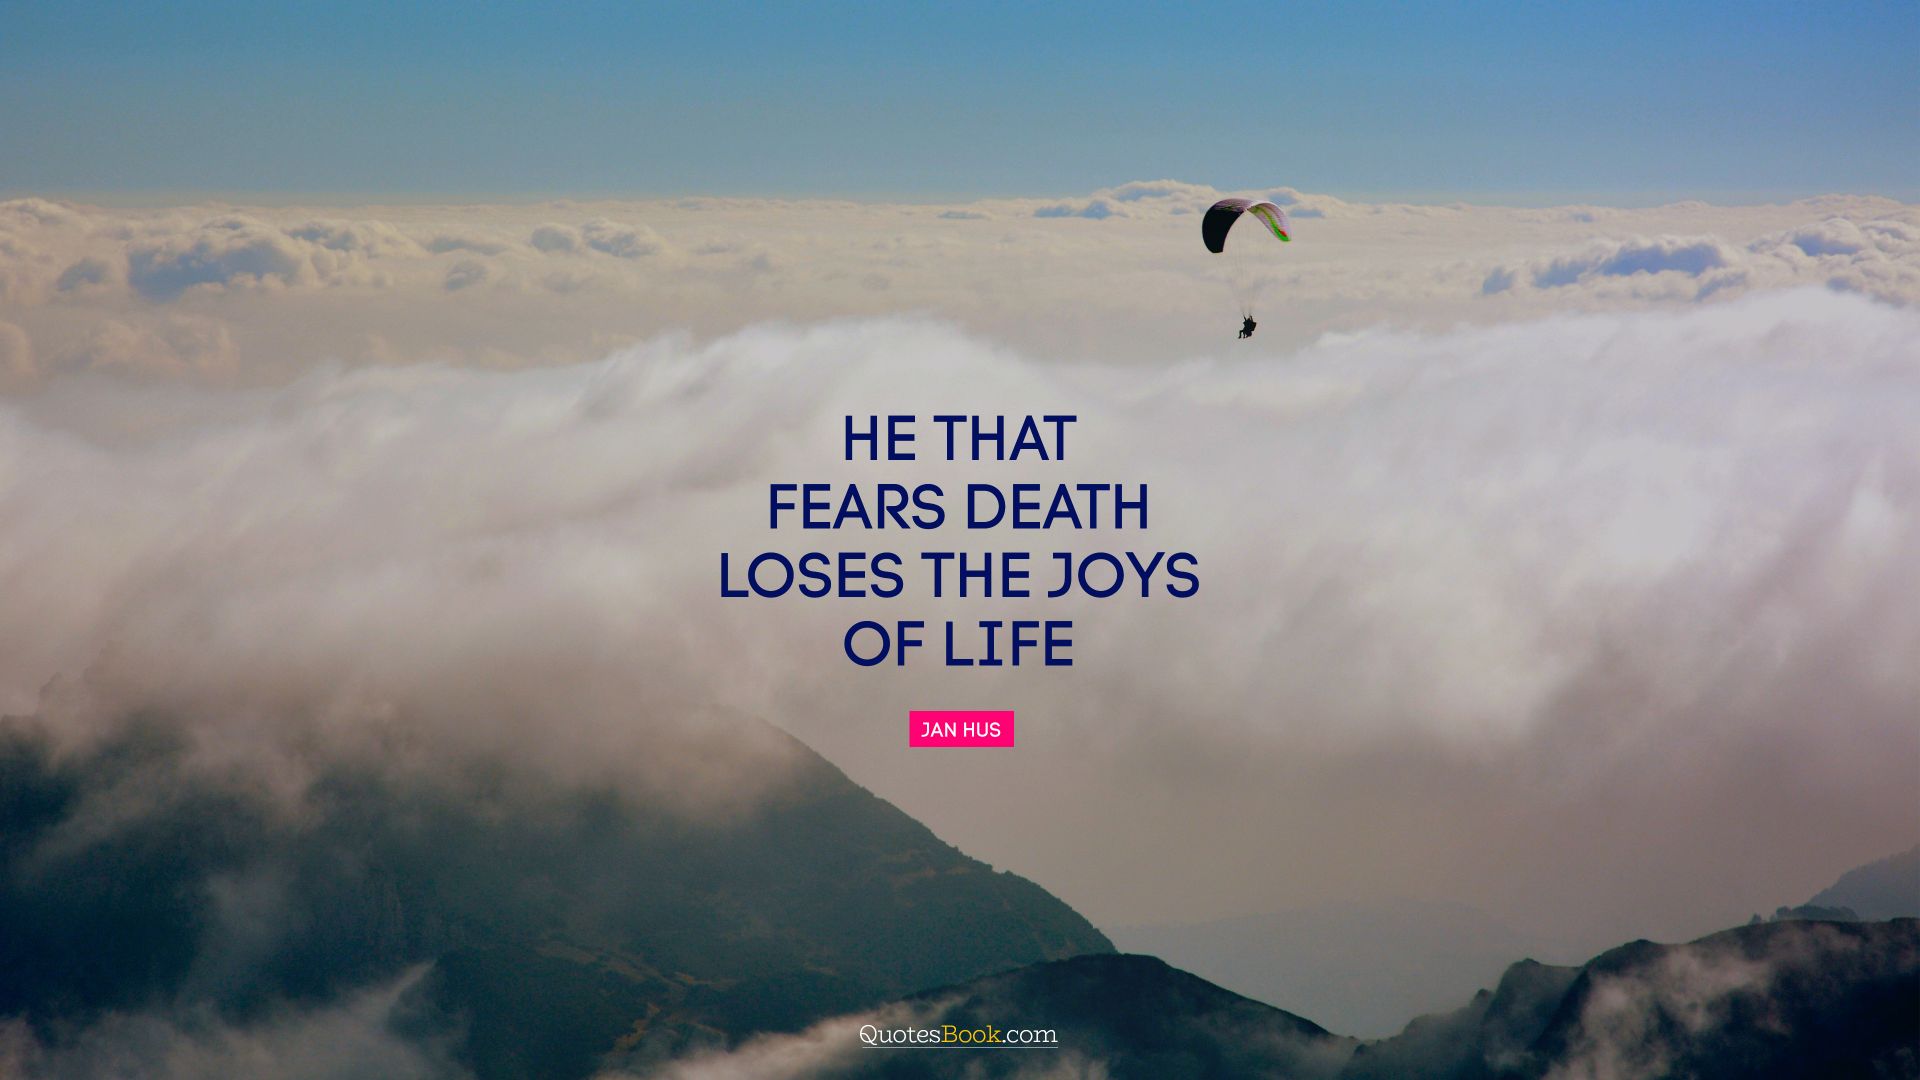 He that fears death loses the joys of life. - Quote by Jan Hus